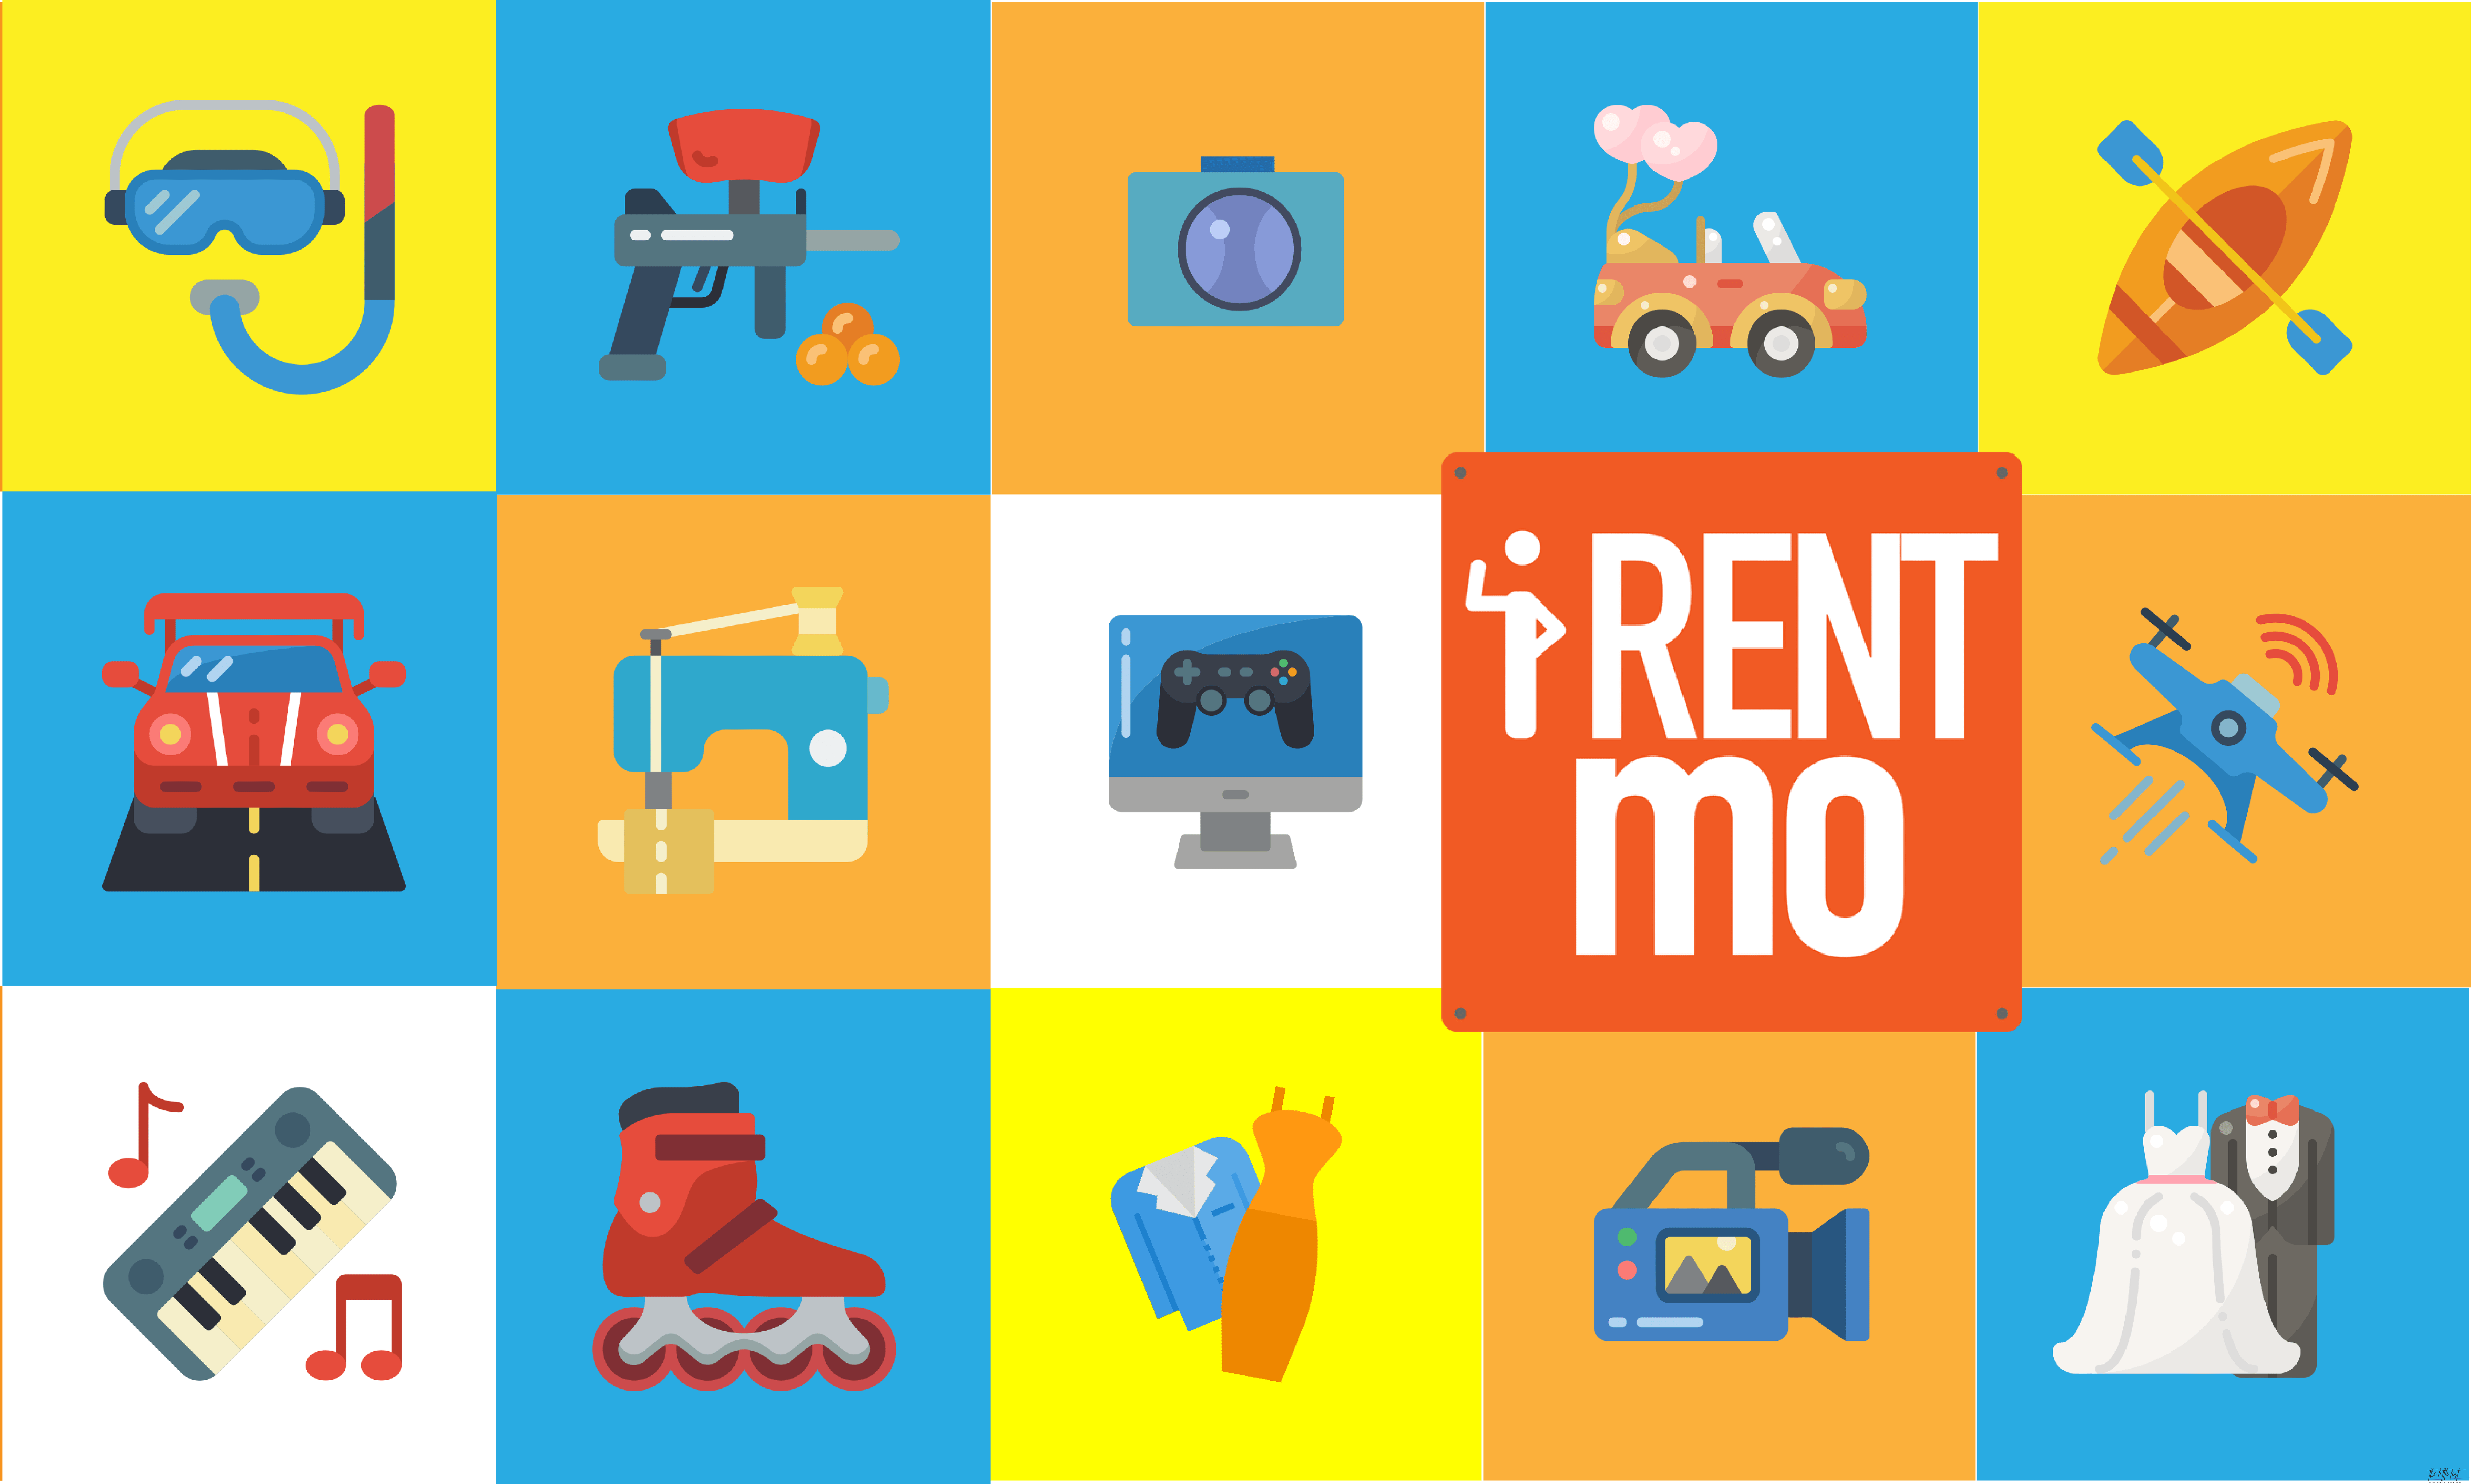 What is the most profitable thing to rent out?